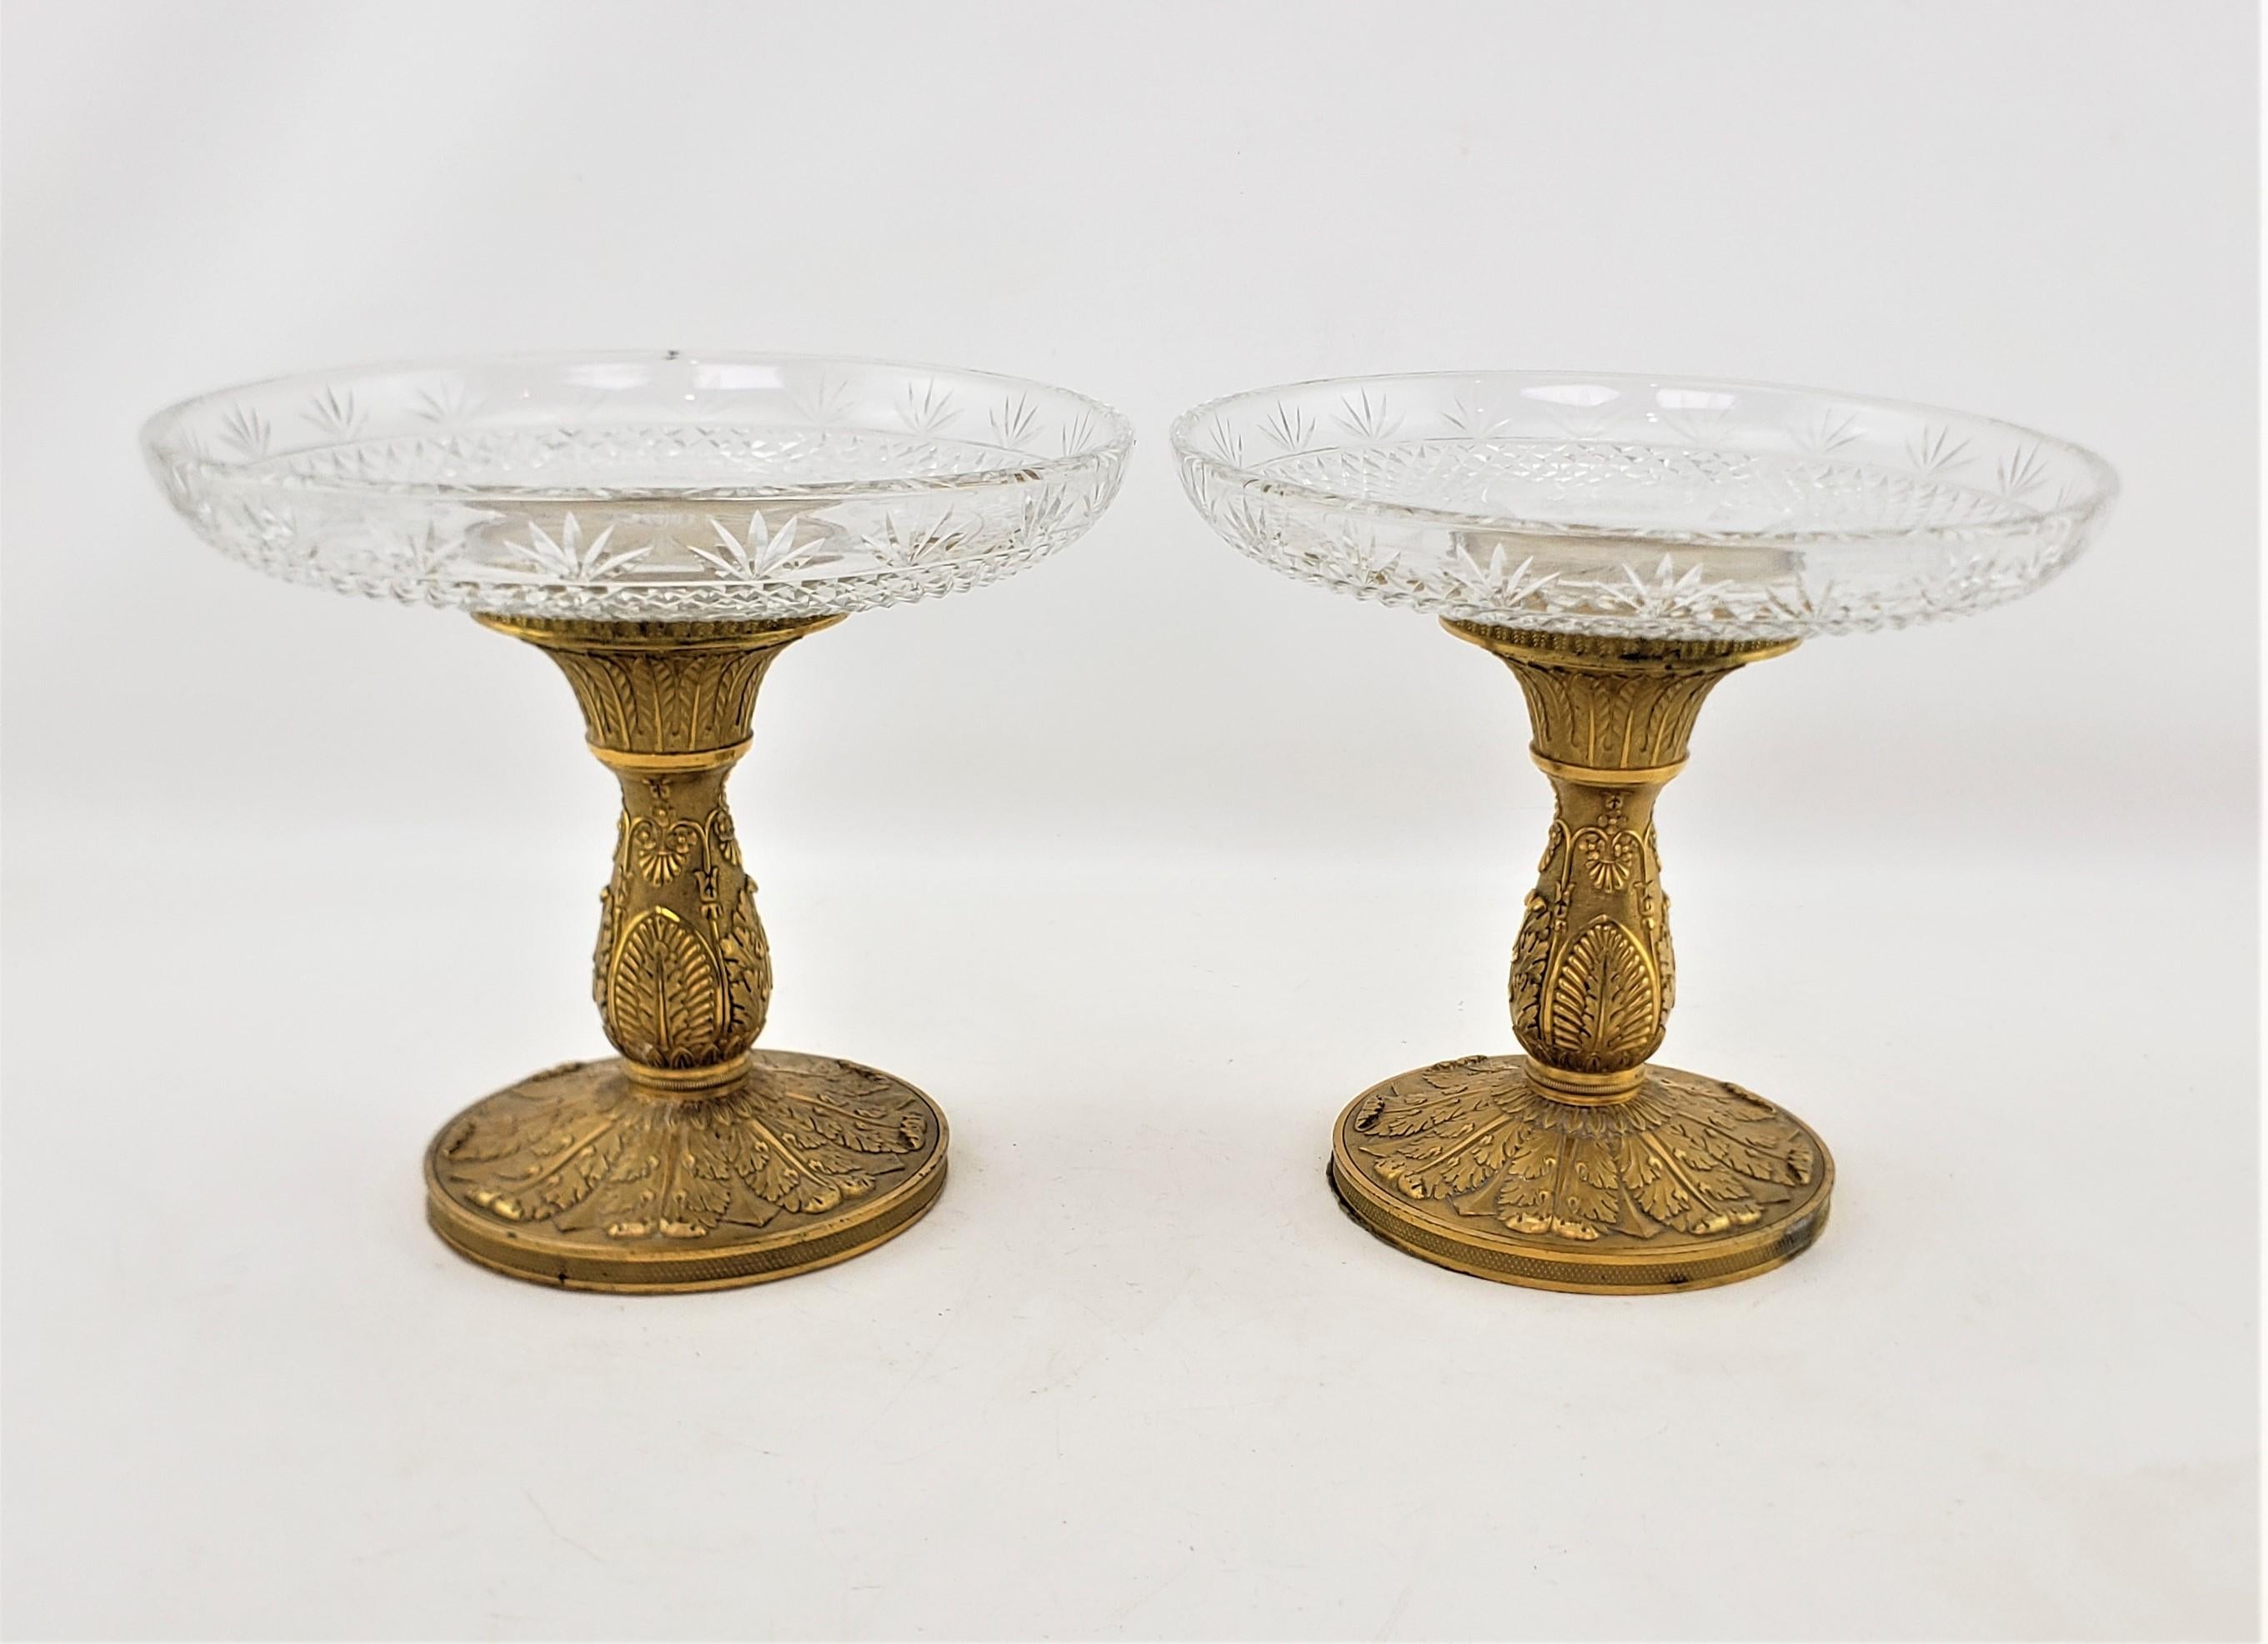 Pair of Antique Gilt Bronze & Crystal Tazzas or Pedestal Bowls For Sale 2